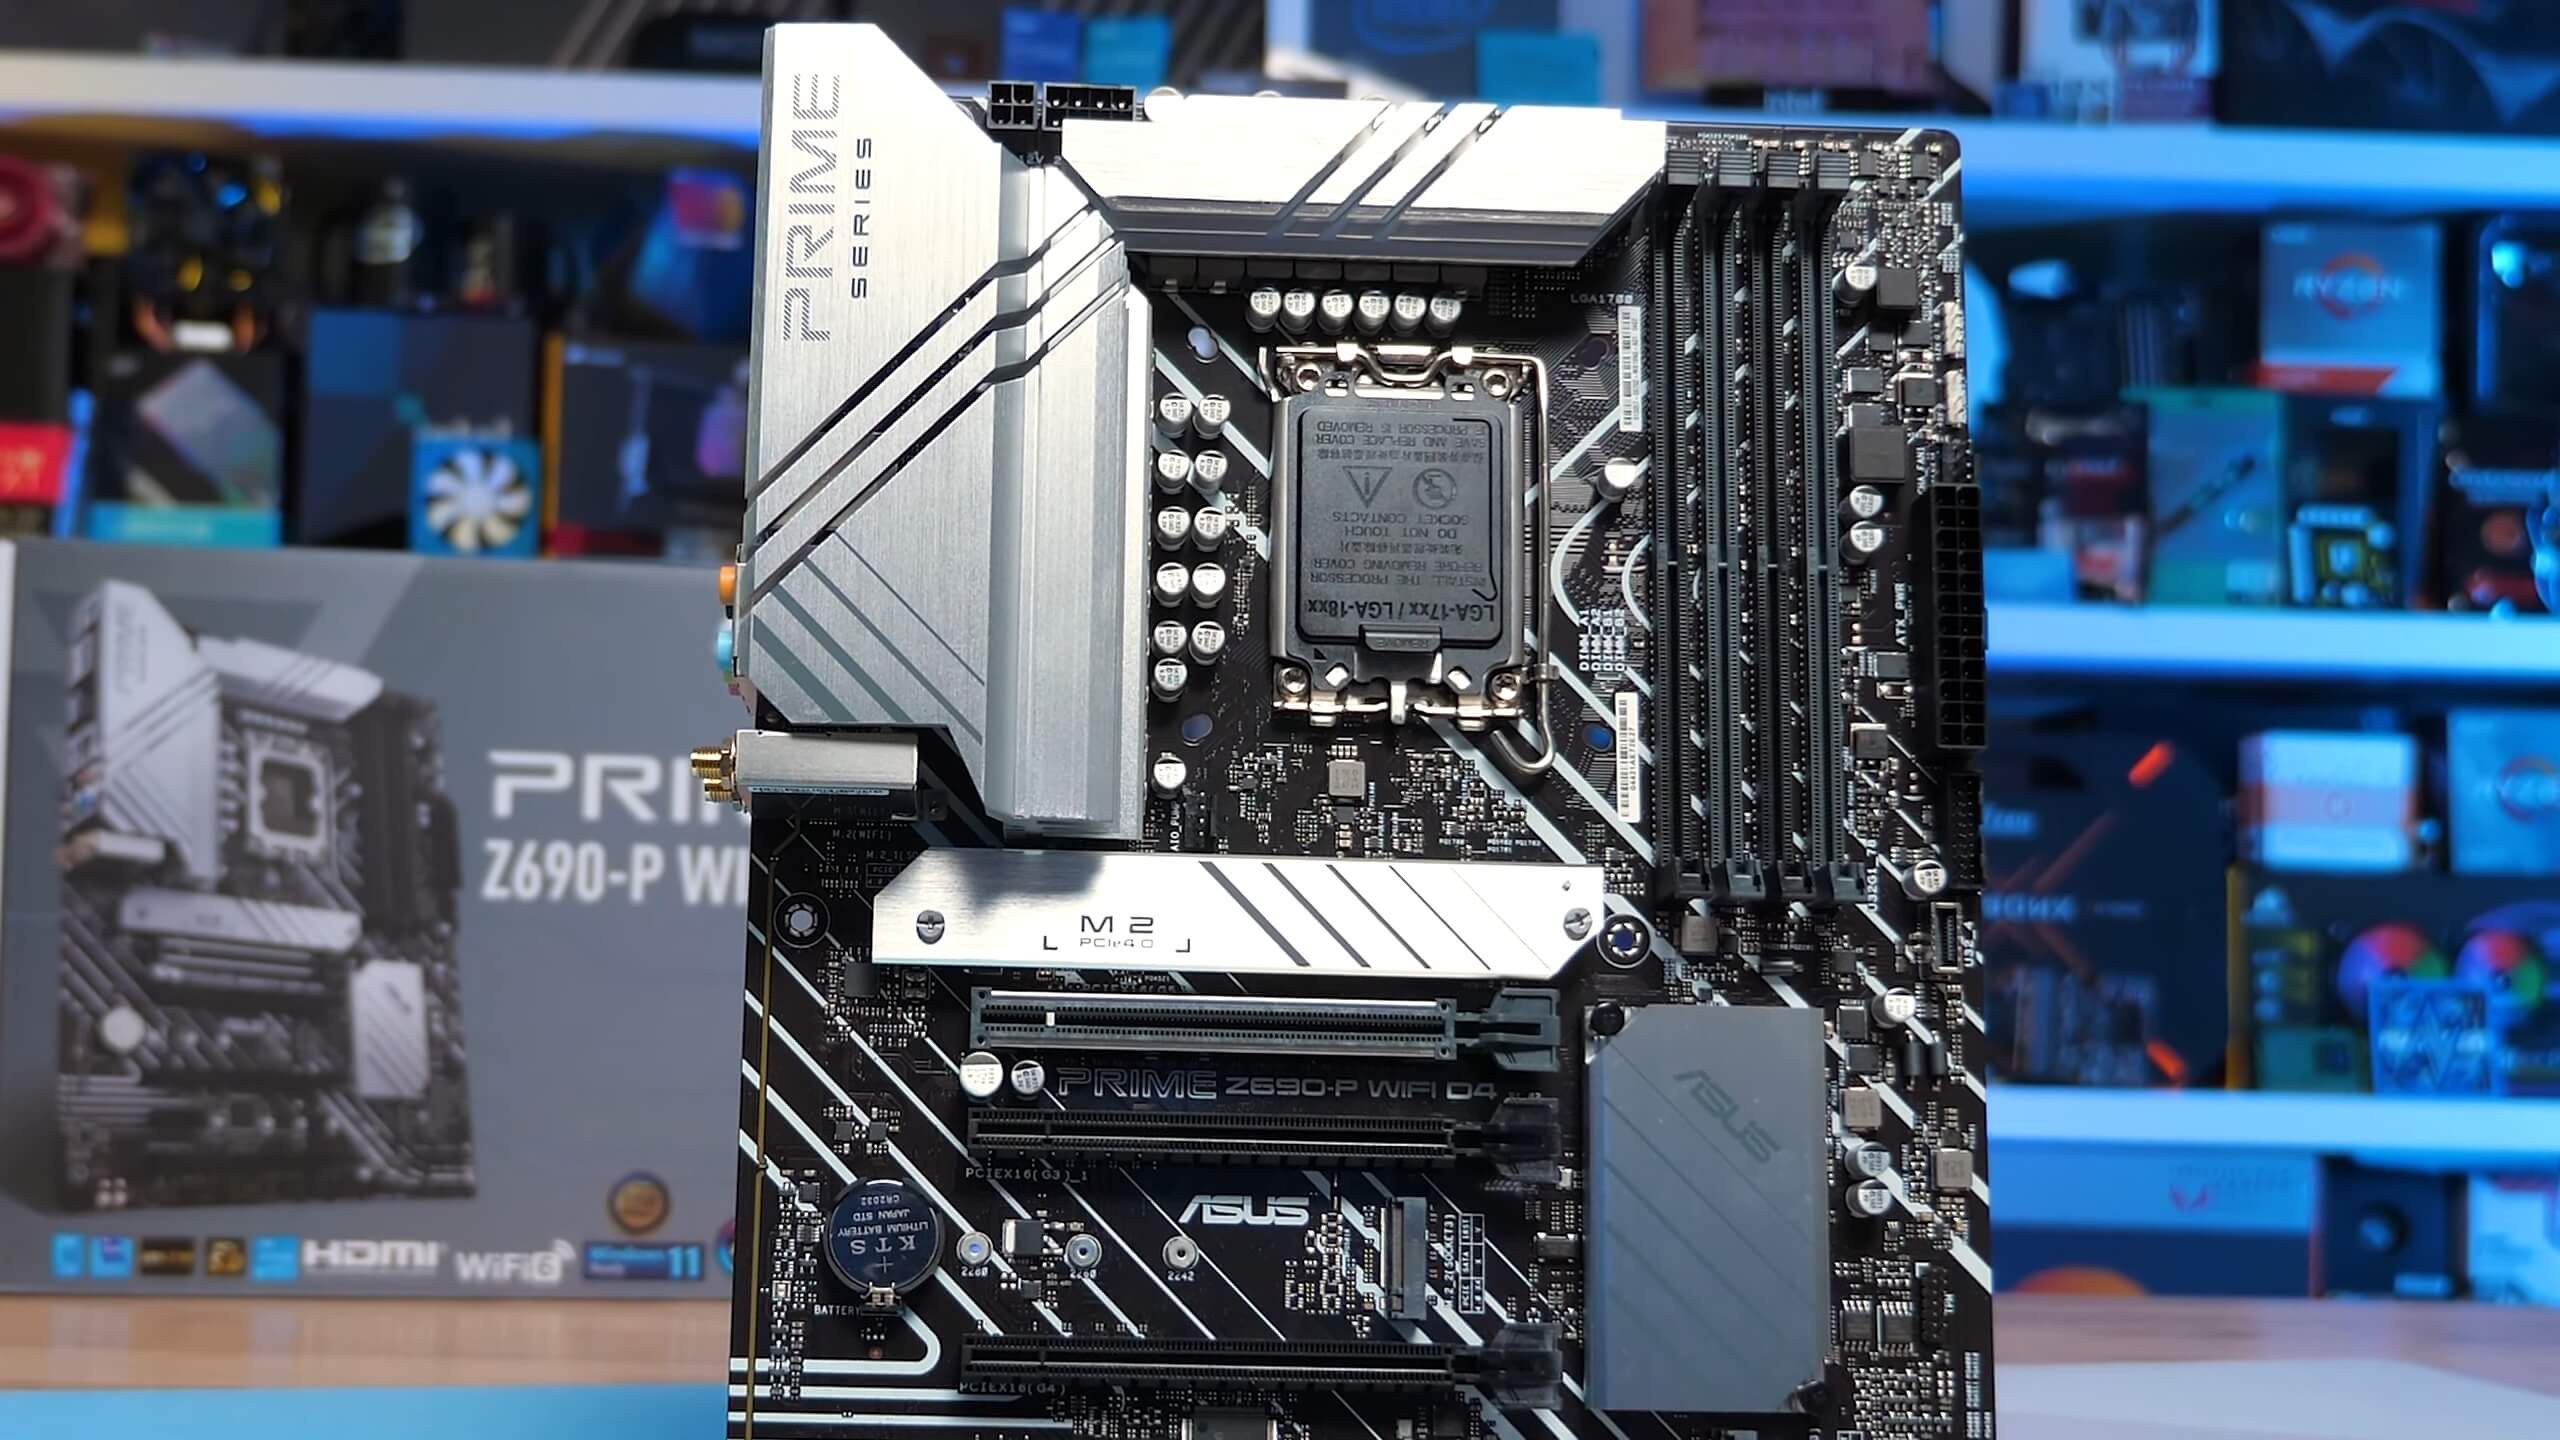 Intel B760 motherboard could receive price hike over B660